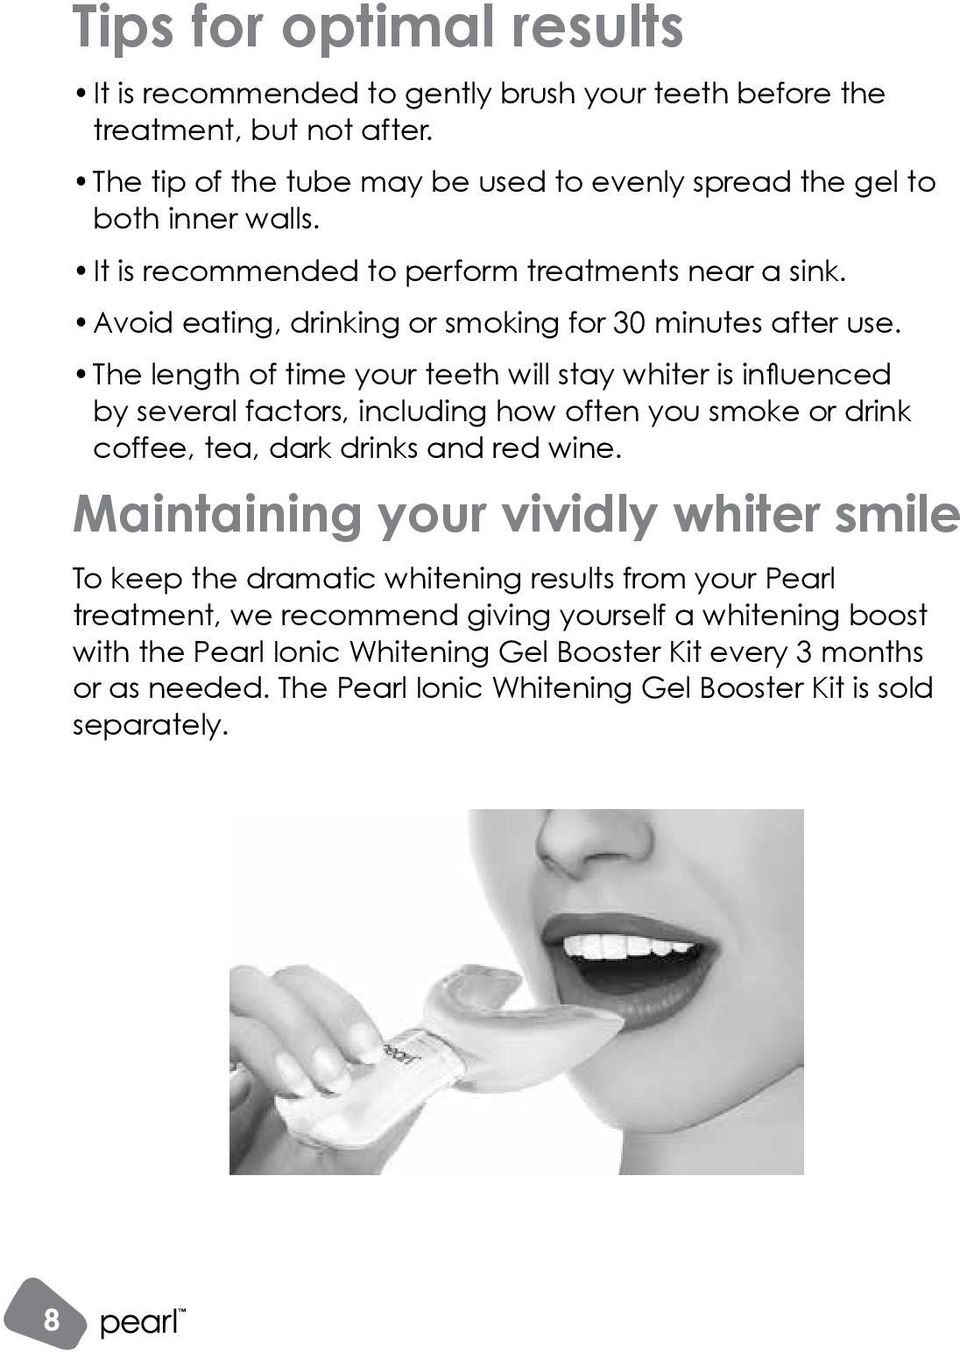 The length of time your teeth will stay whiter is influenced by several factors, including how often you smoke or drink coffee, tea, dark drinks and red wine.